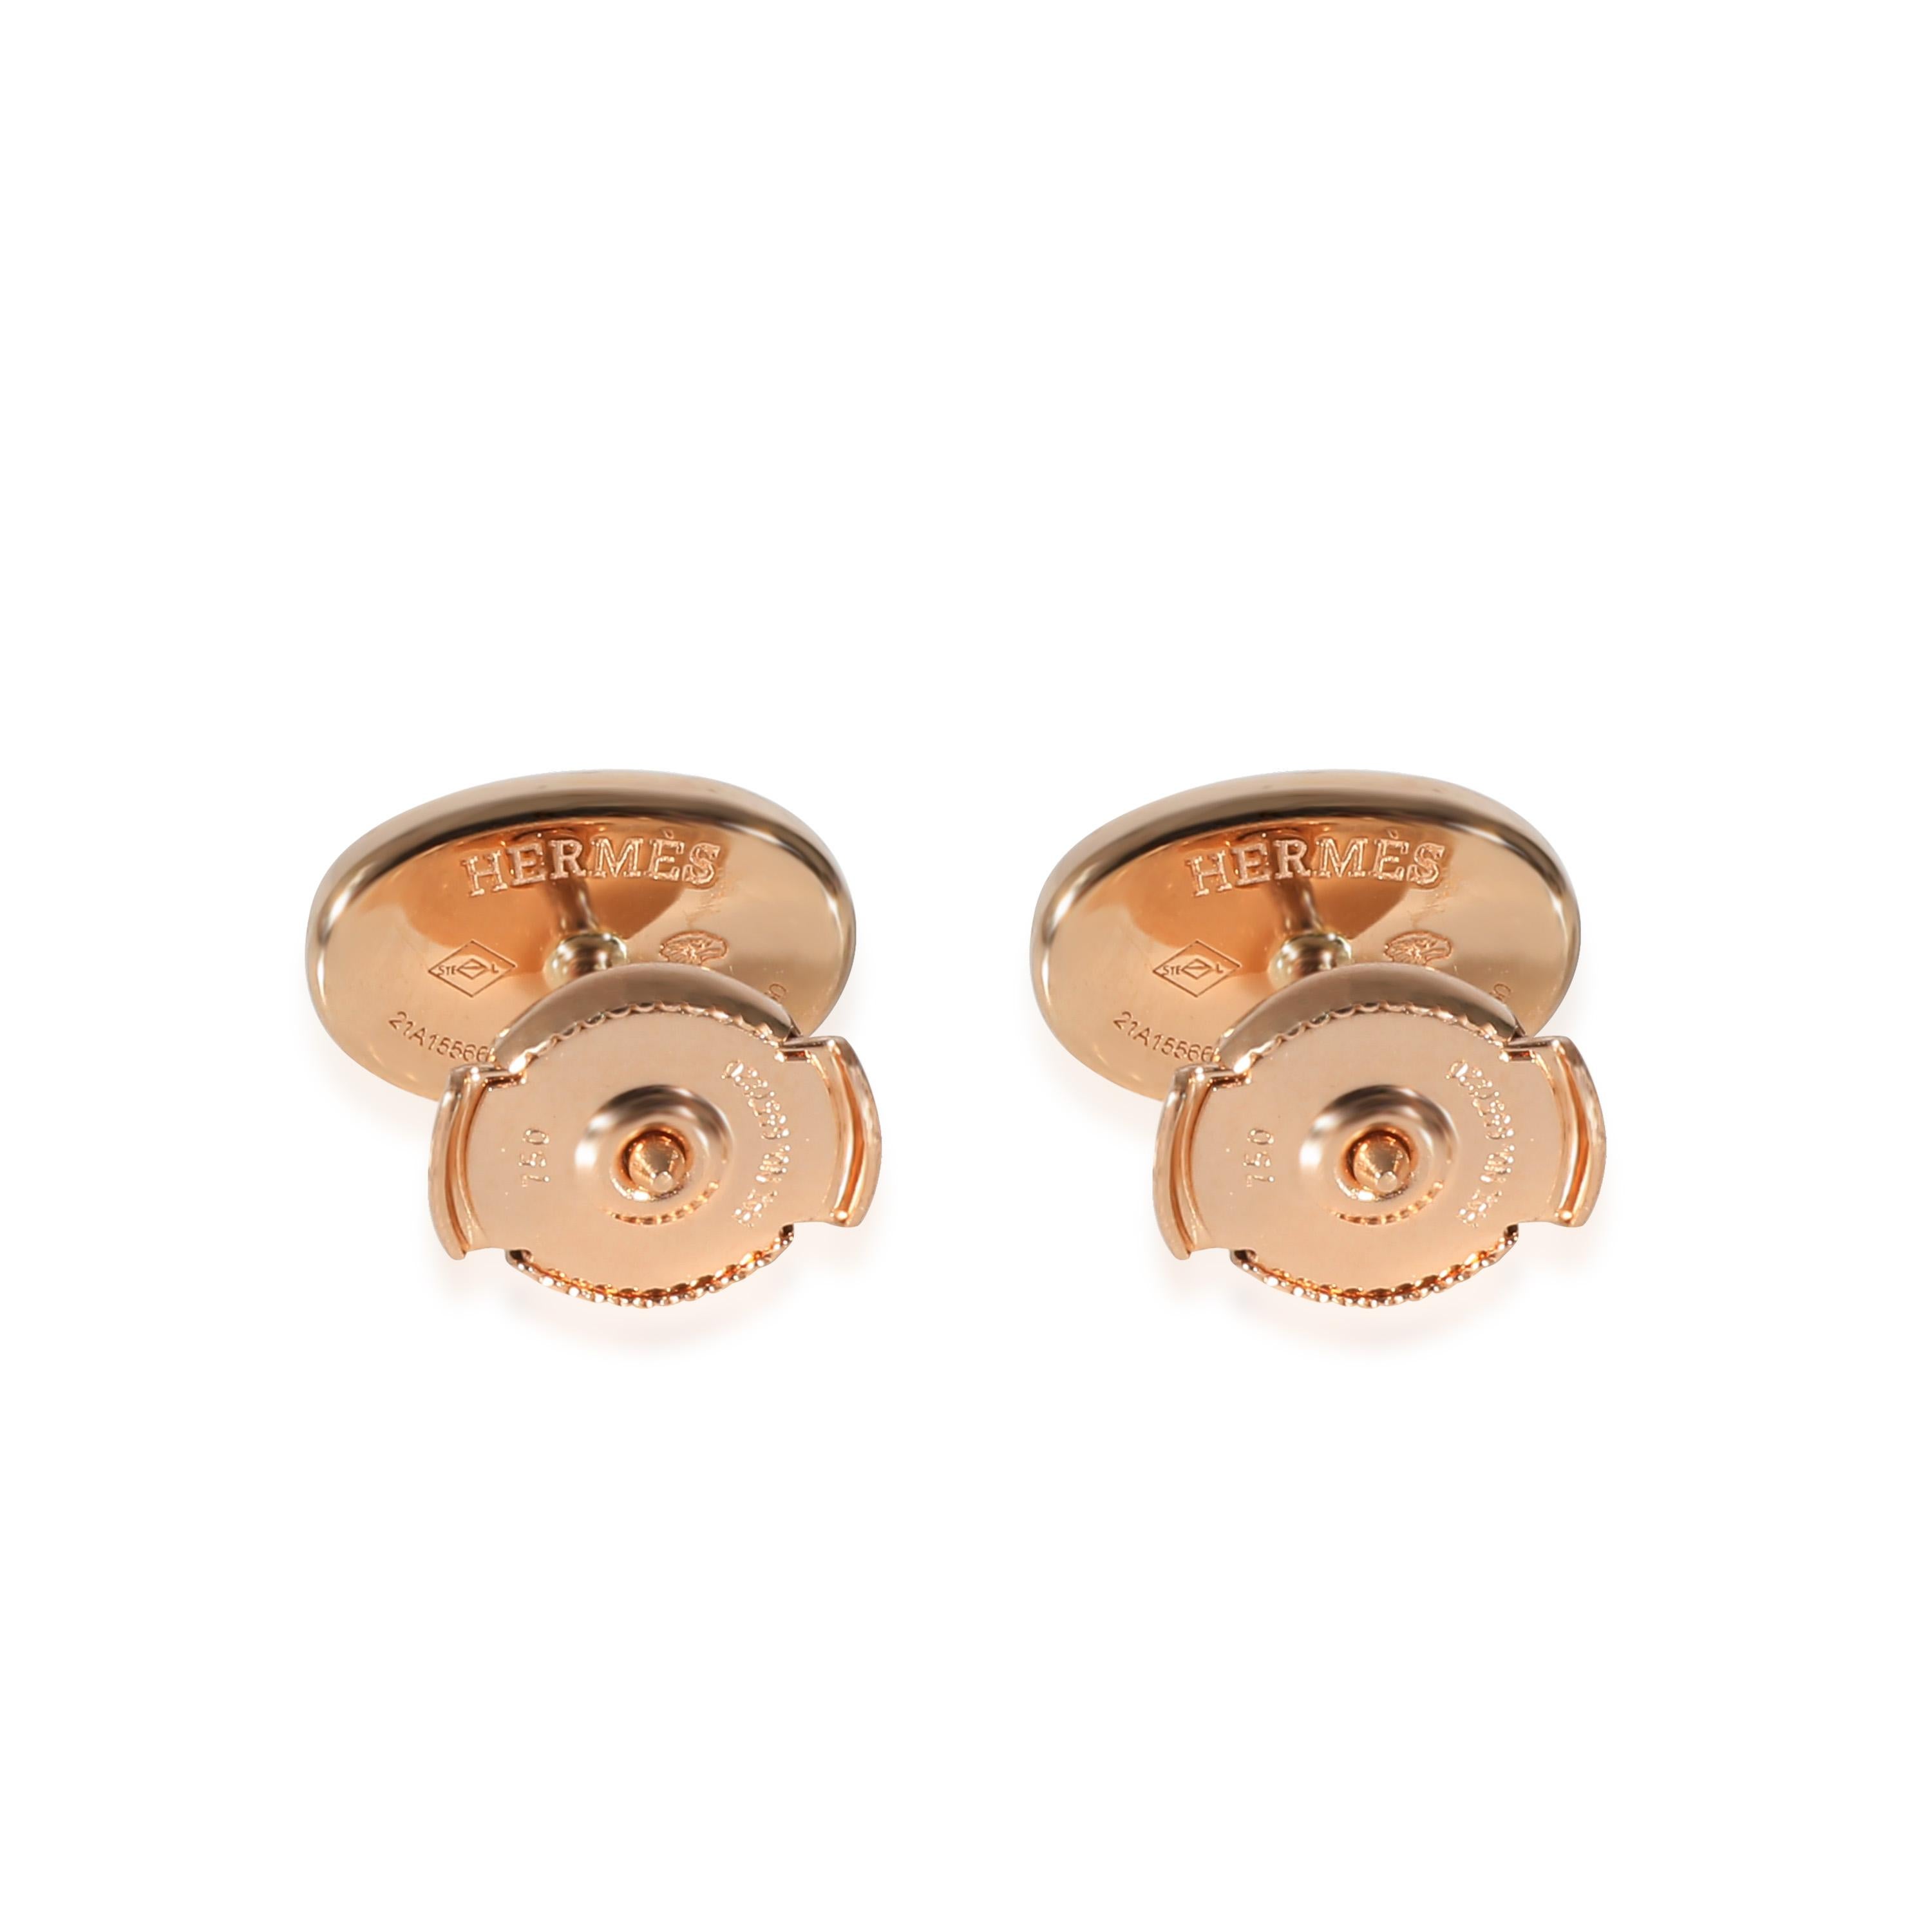 Hermès Chaine d'ancre Earrings in 18k Rose Gold 0.18 CTW

PRIMARY DETAILS
SKU: 135813
Listing Title: Hermès Chaine d'ancre Earrings in 18k Rose Gold 0.18 CTW
Condition Description: Retails for 4925 USD. In excellent condition. 11 mm in length. Comes